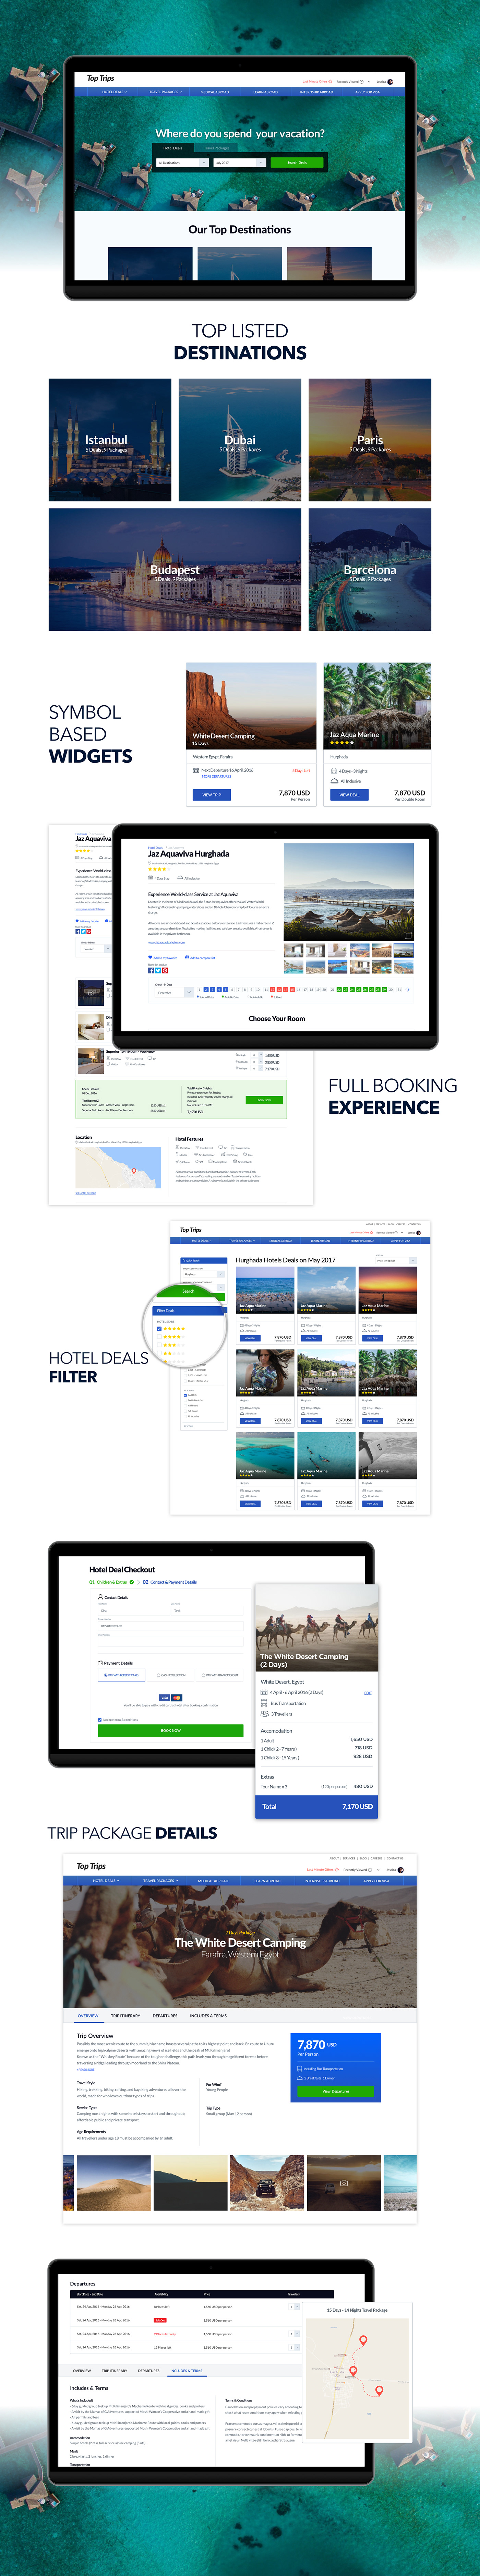 Booking hotel trips Deals Ecommerce Travel accomodation Website template